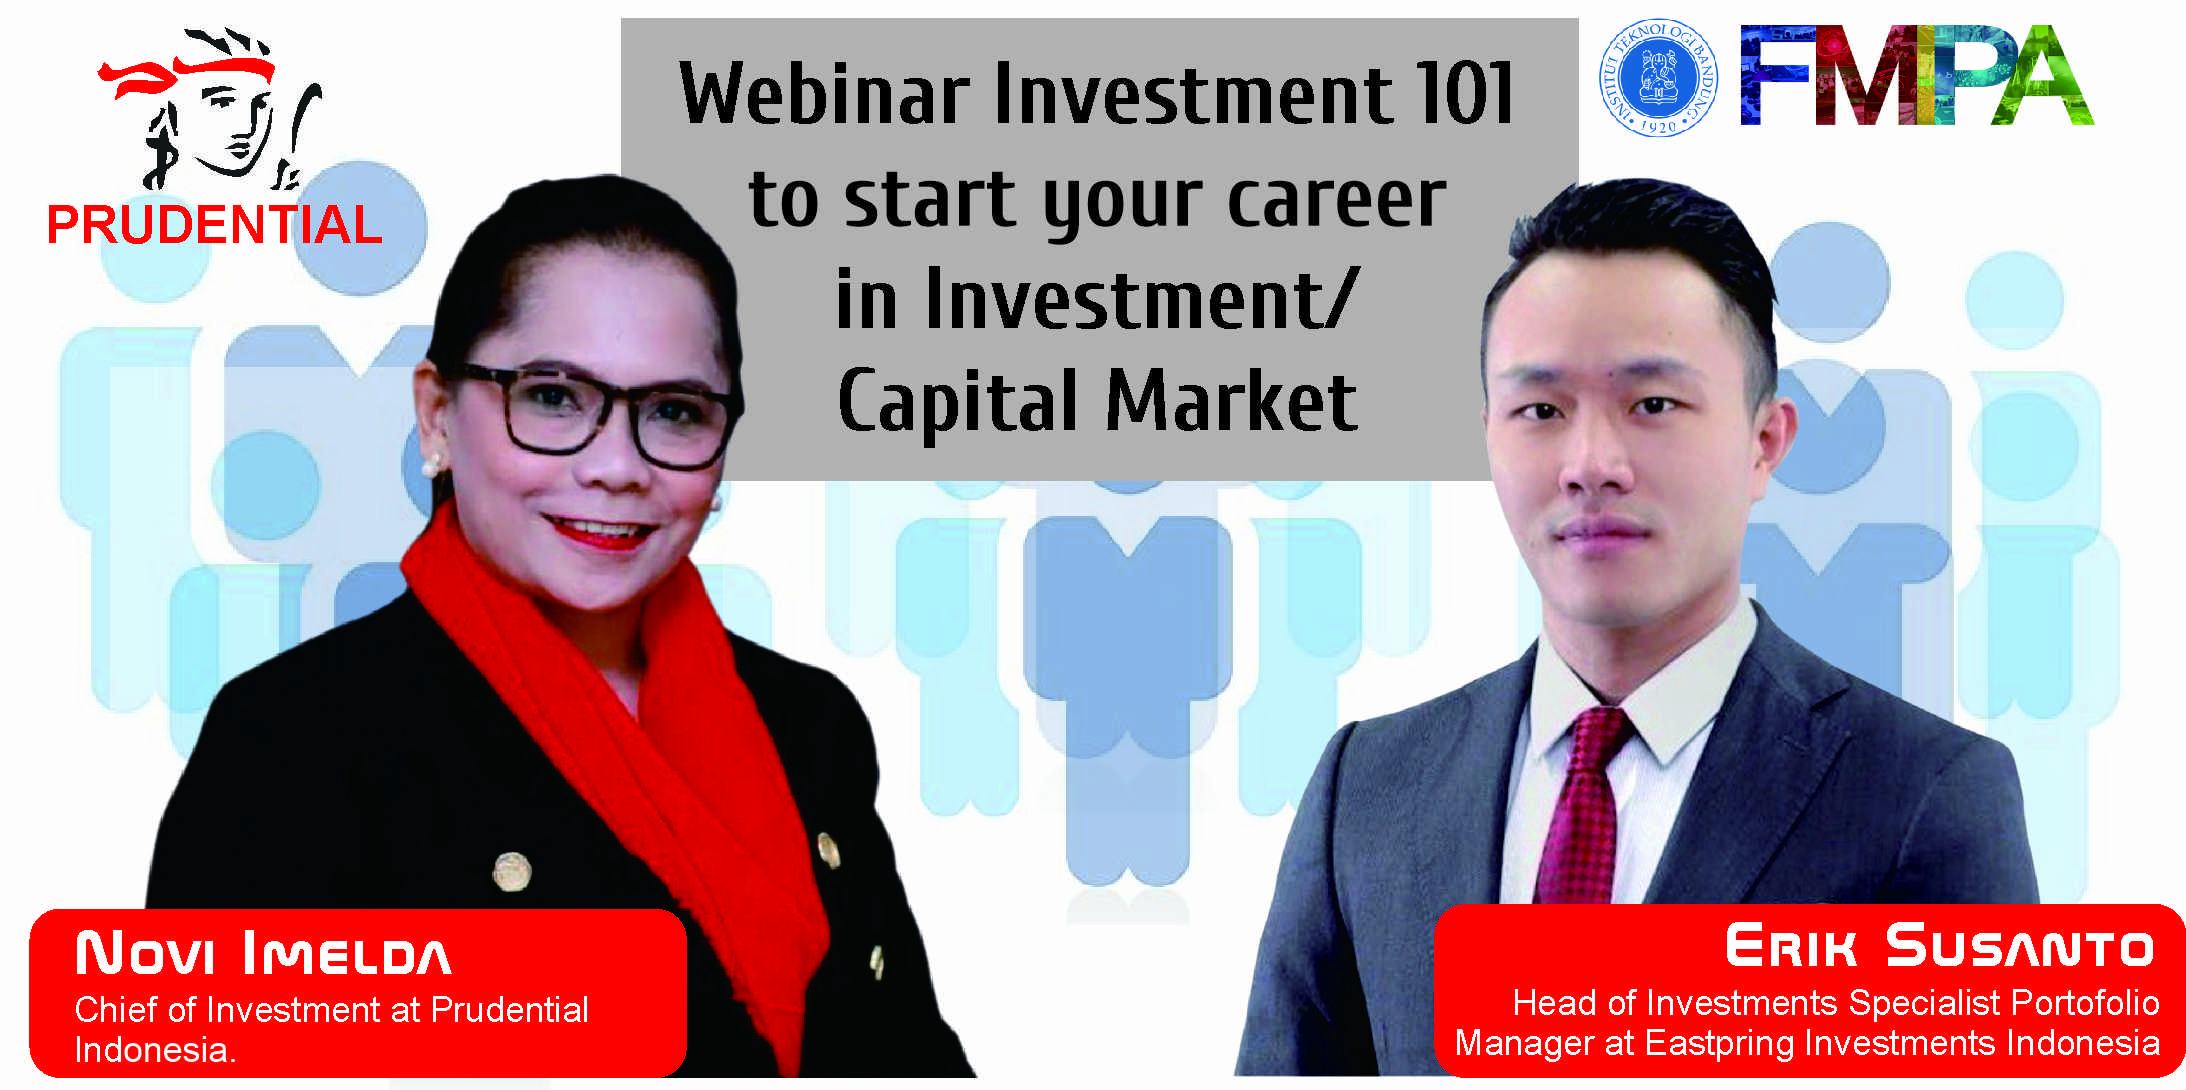 Webinar Investment 101 to start your career in Investment/Capital Market